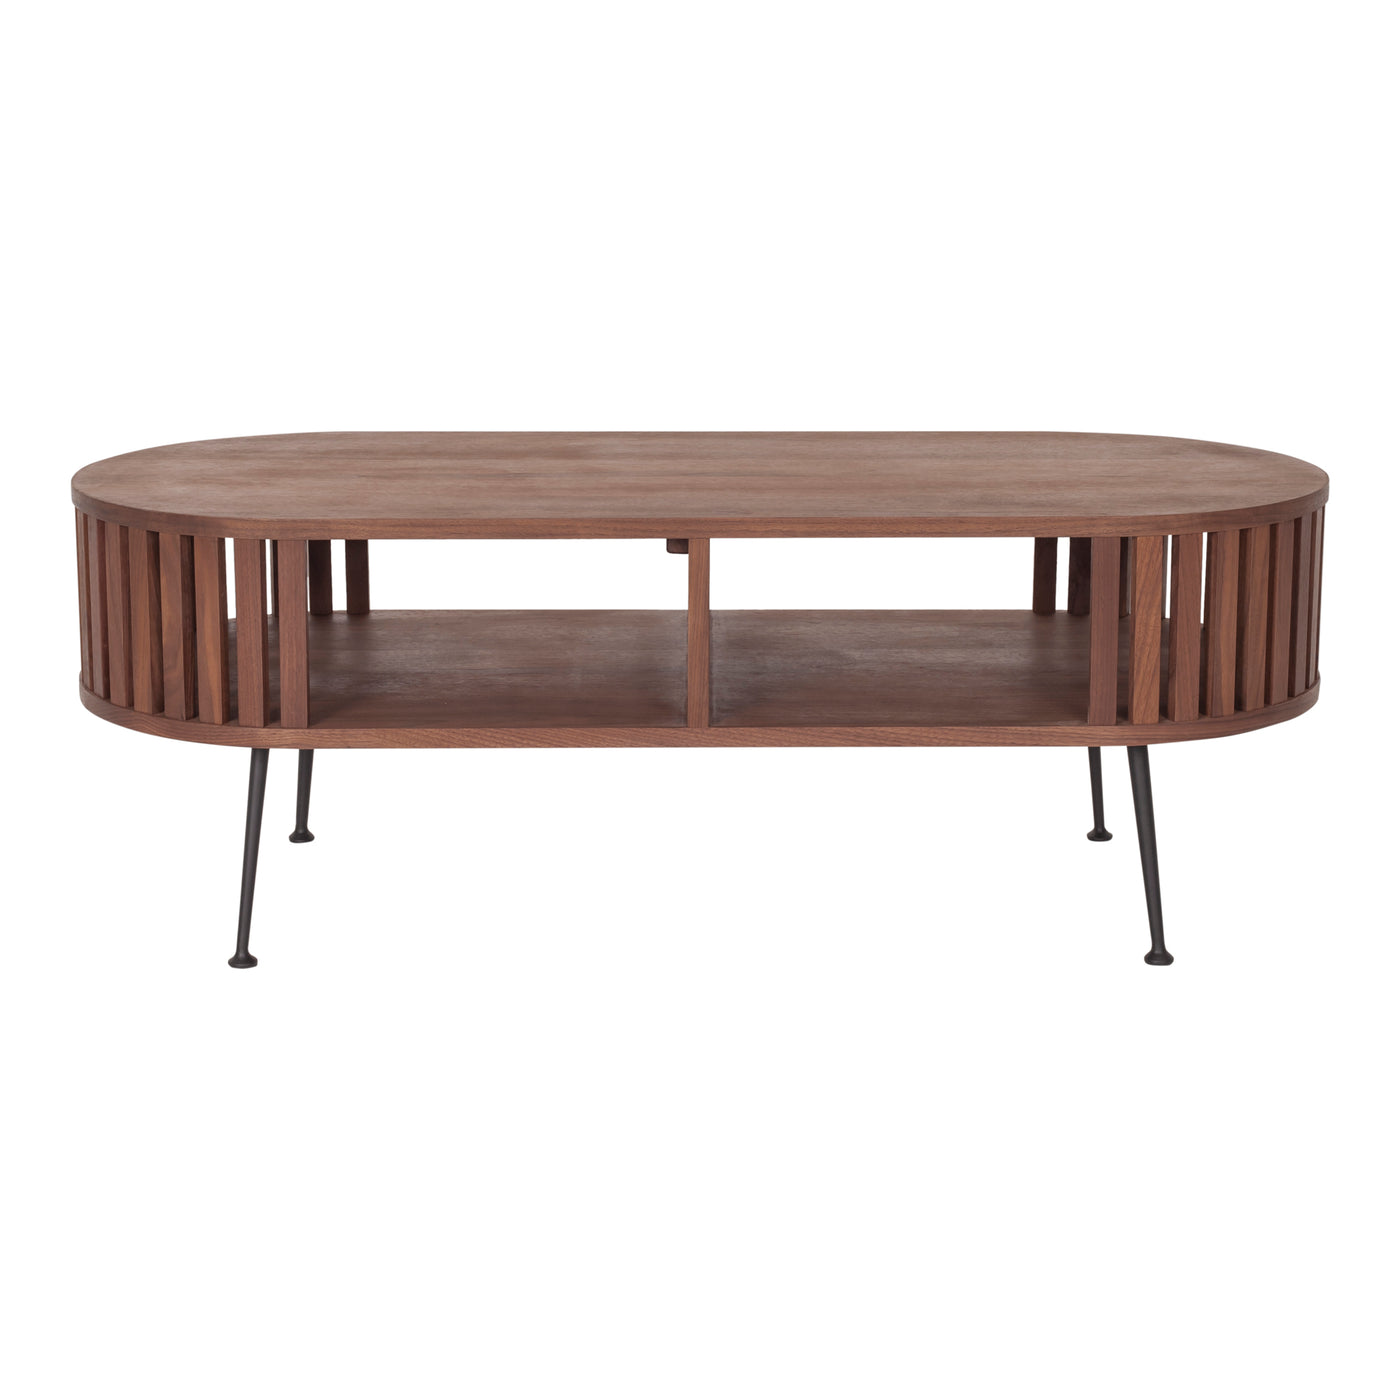 An entirely practical mid-century modern design with clean lines, tapered legs, and gently rounded, smooth silhouette. Thi...